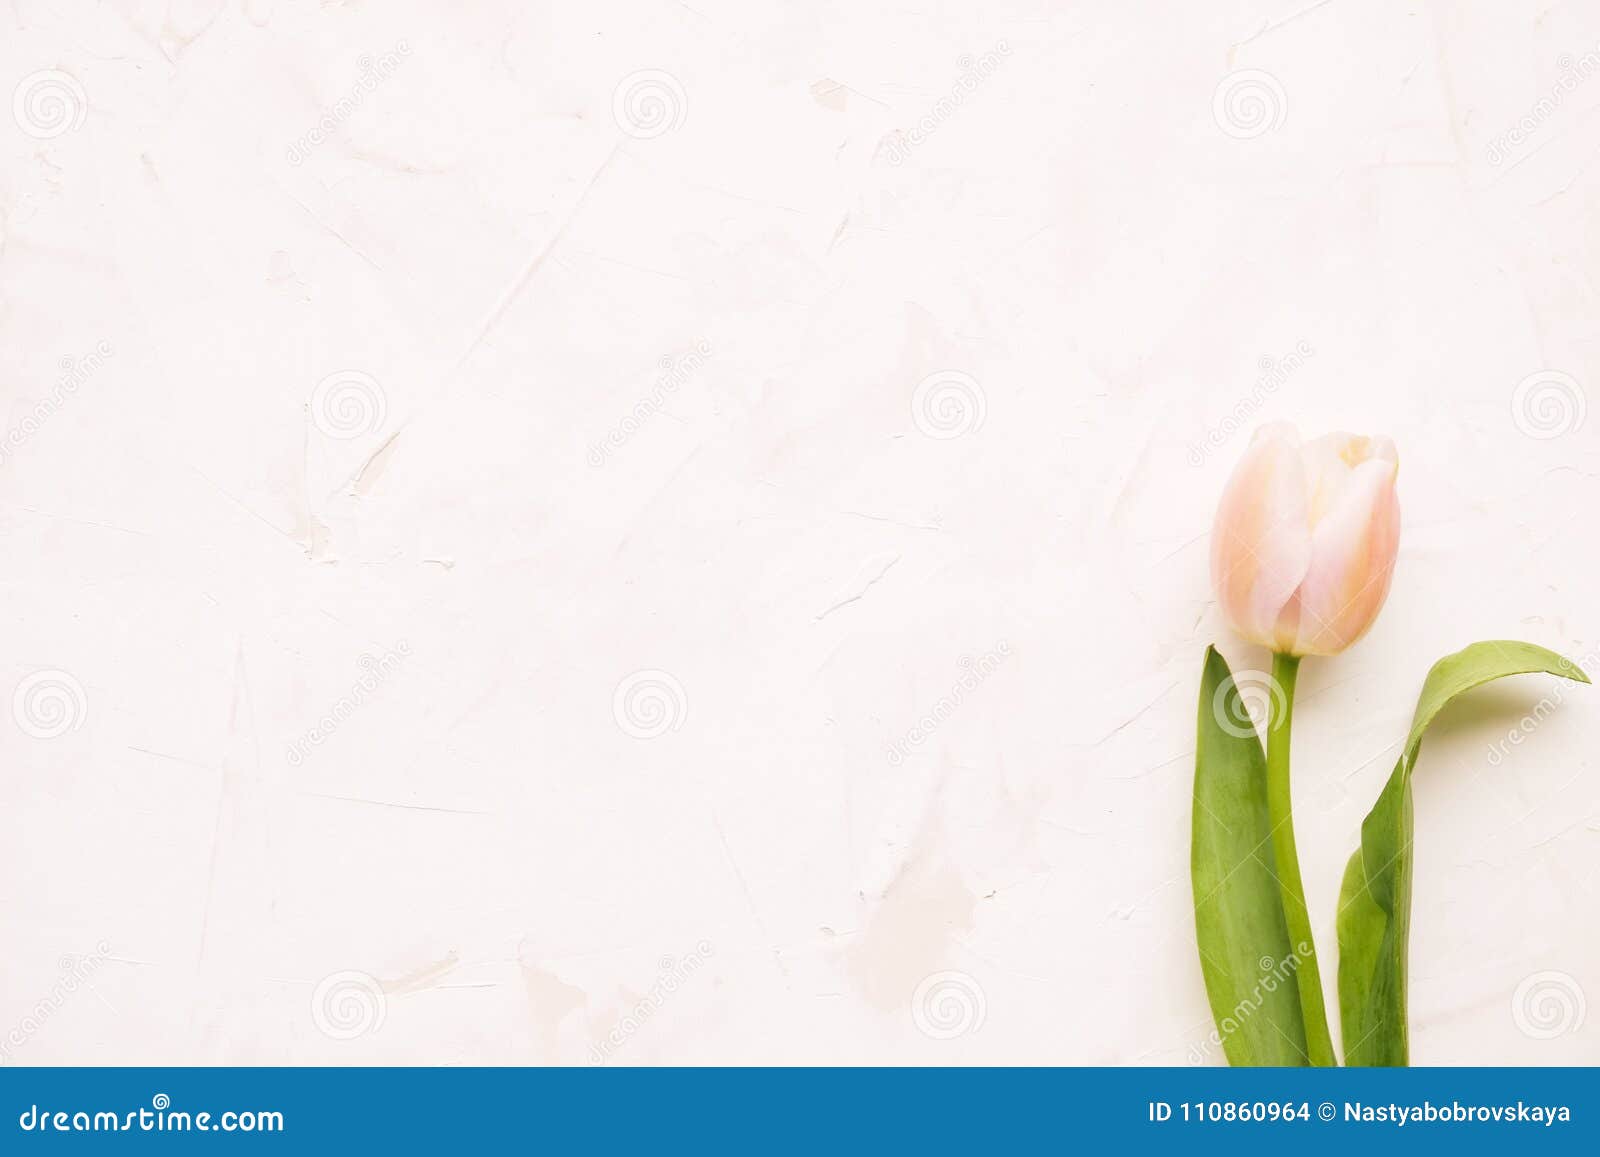 Tender Minimalistic Spring Flowers Composition on Texture Surface ...